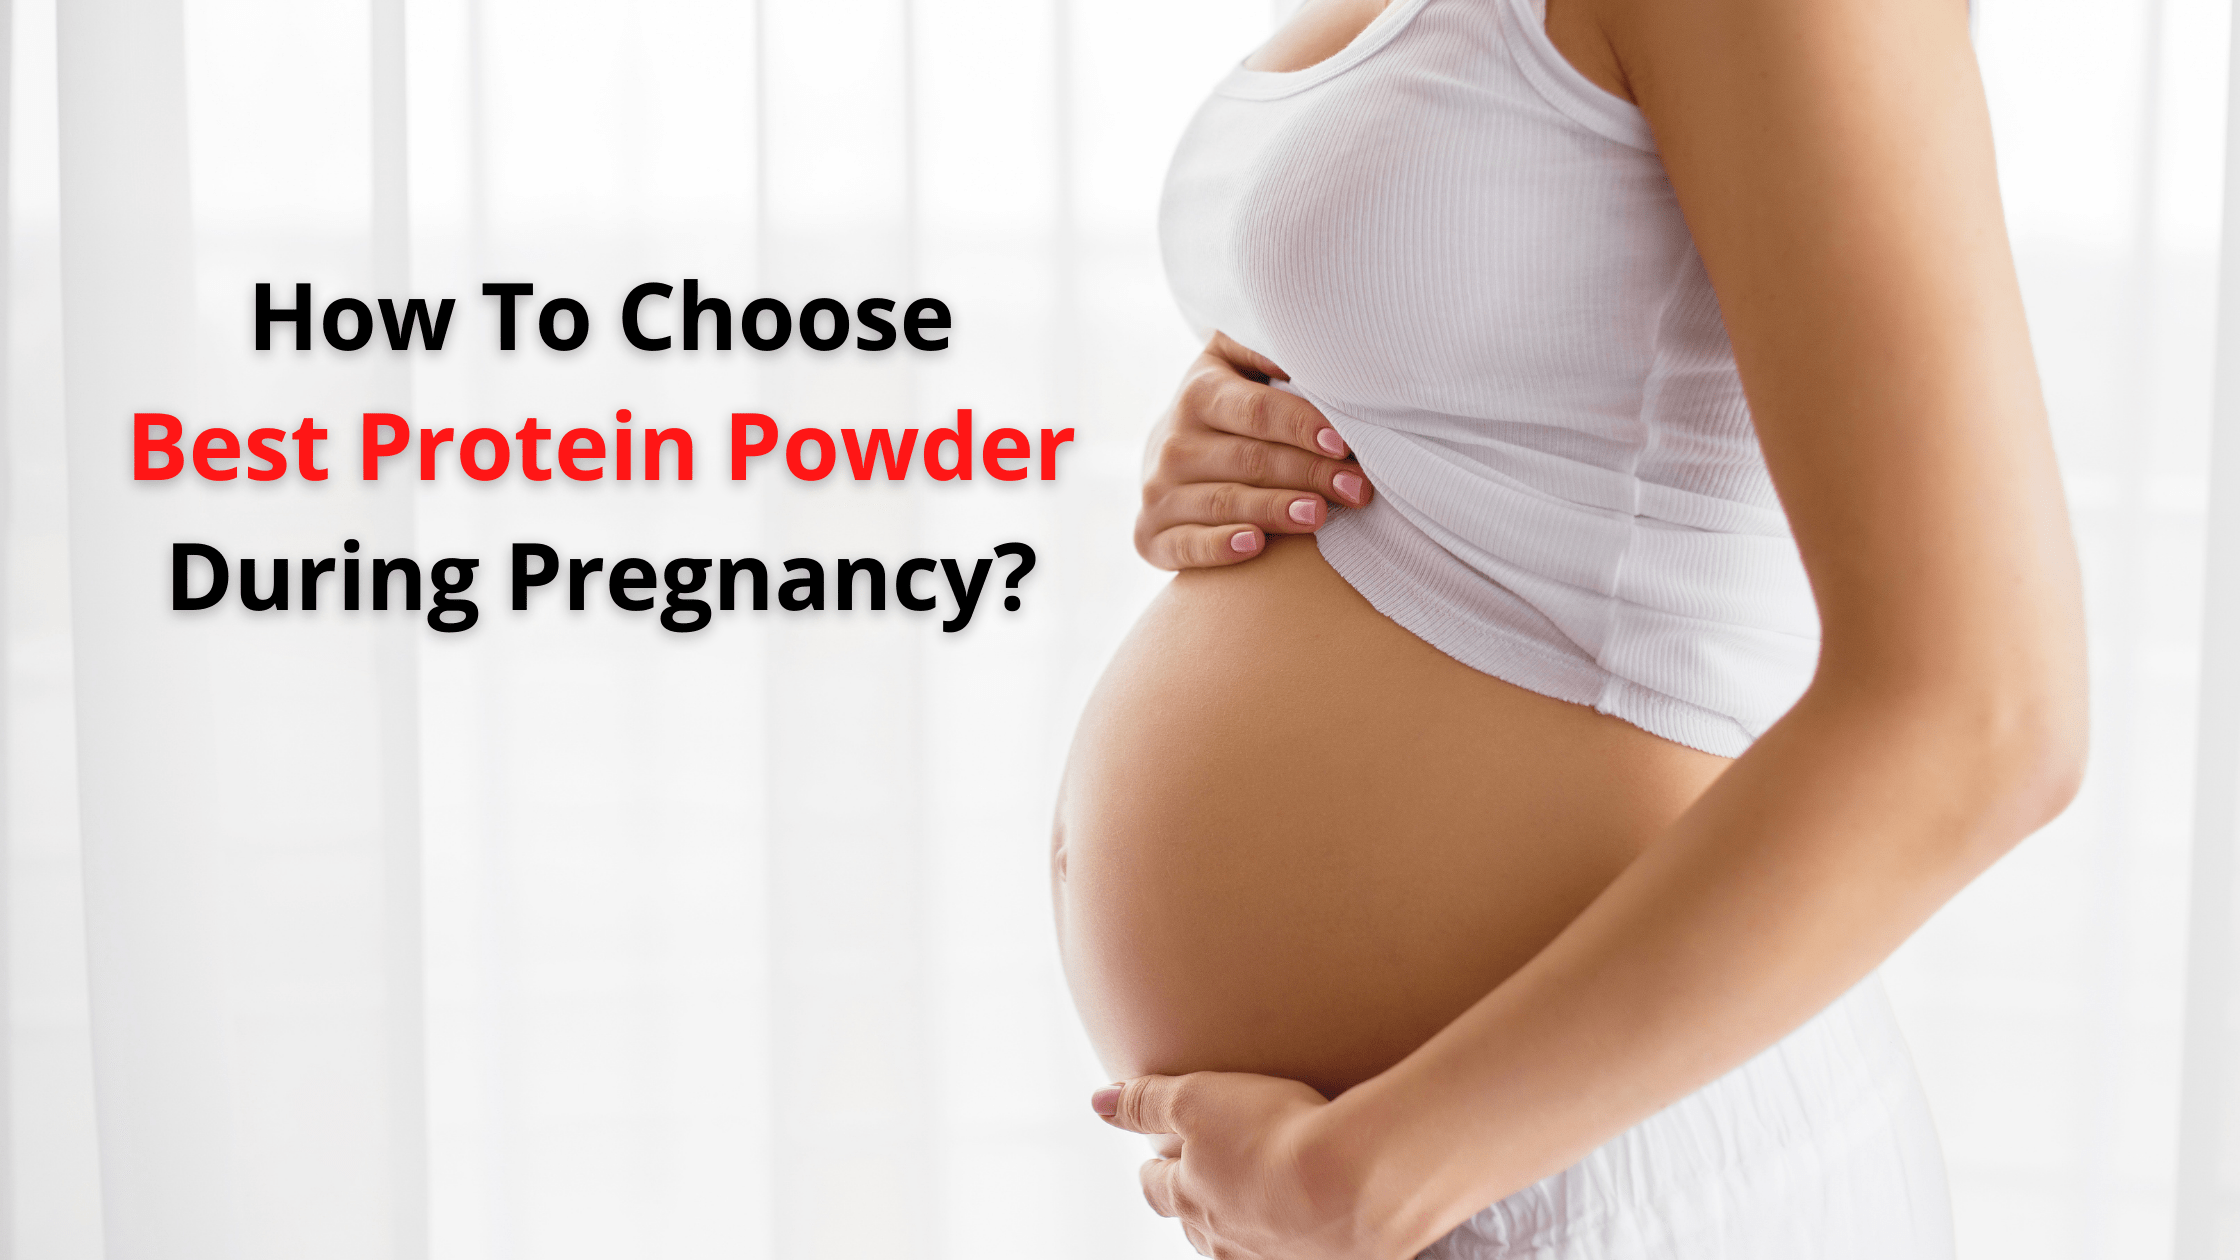 How to choose best protein powder during pregnancy your pregnancy?